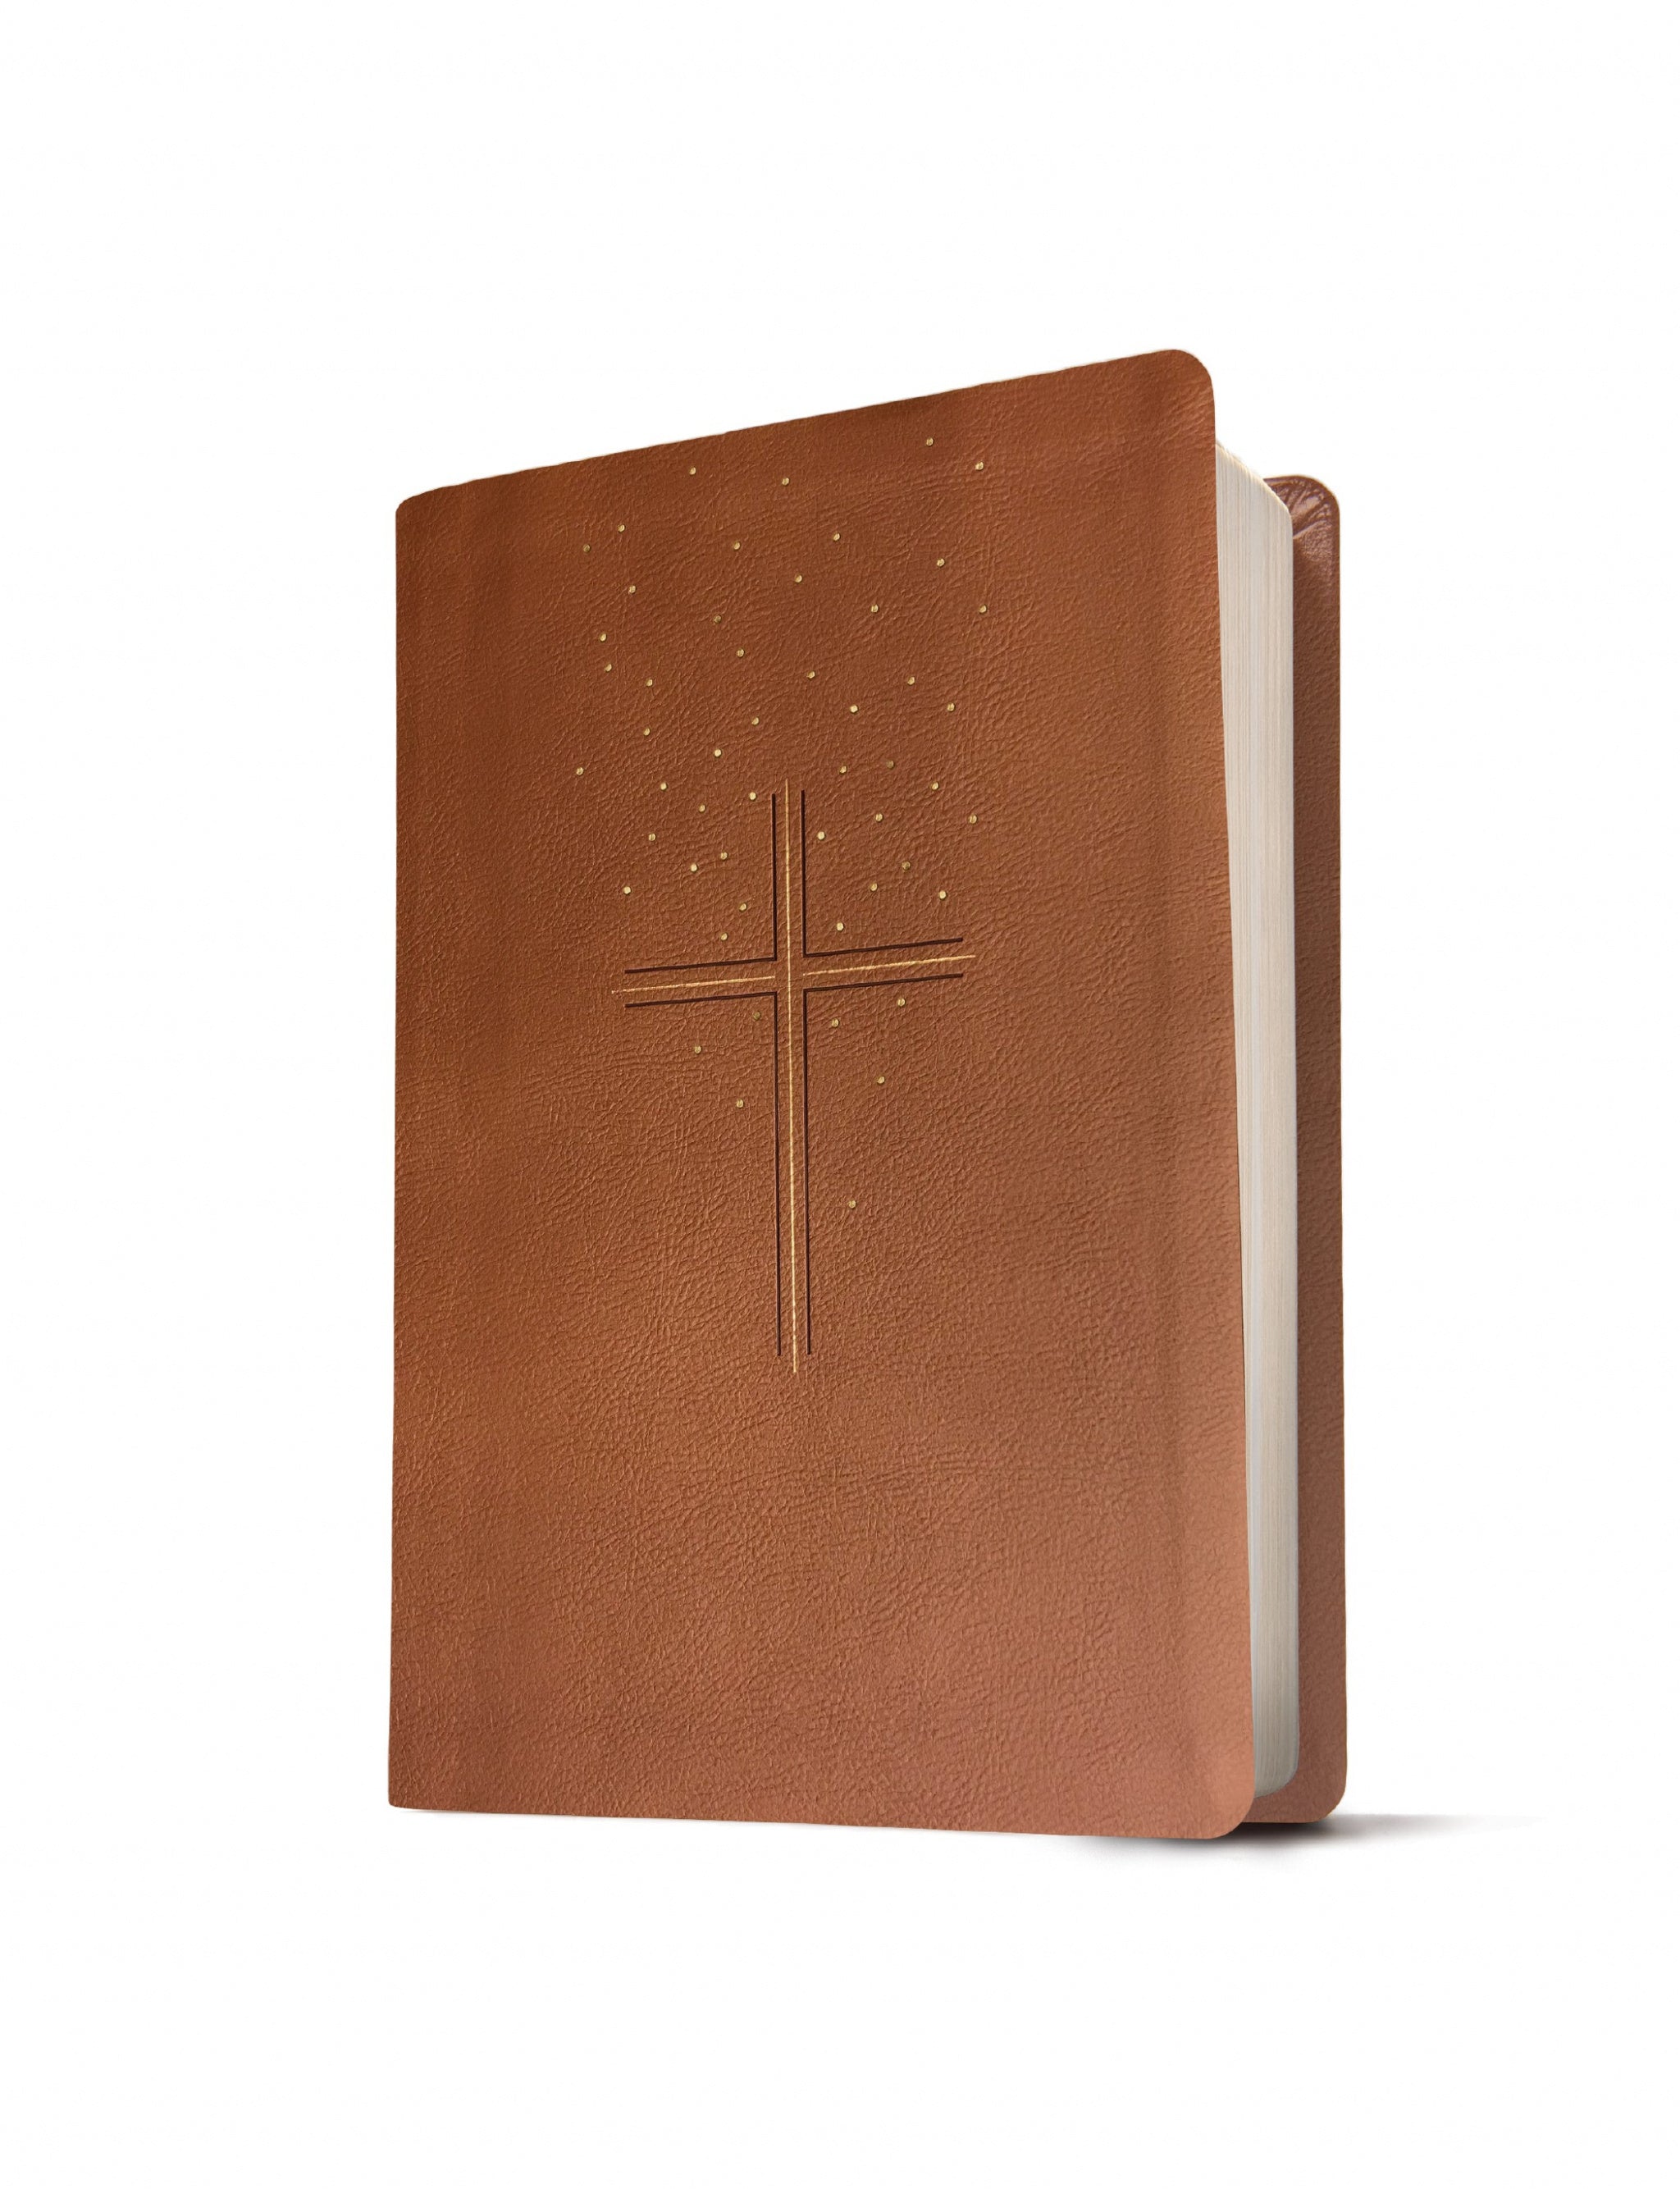 Image of The Message Devotional Bible, Large Print, Imitation Leather, Brown, Reflection Questions other